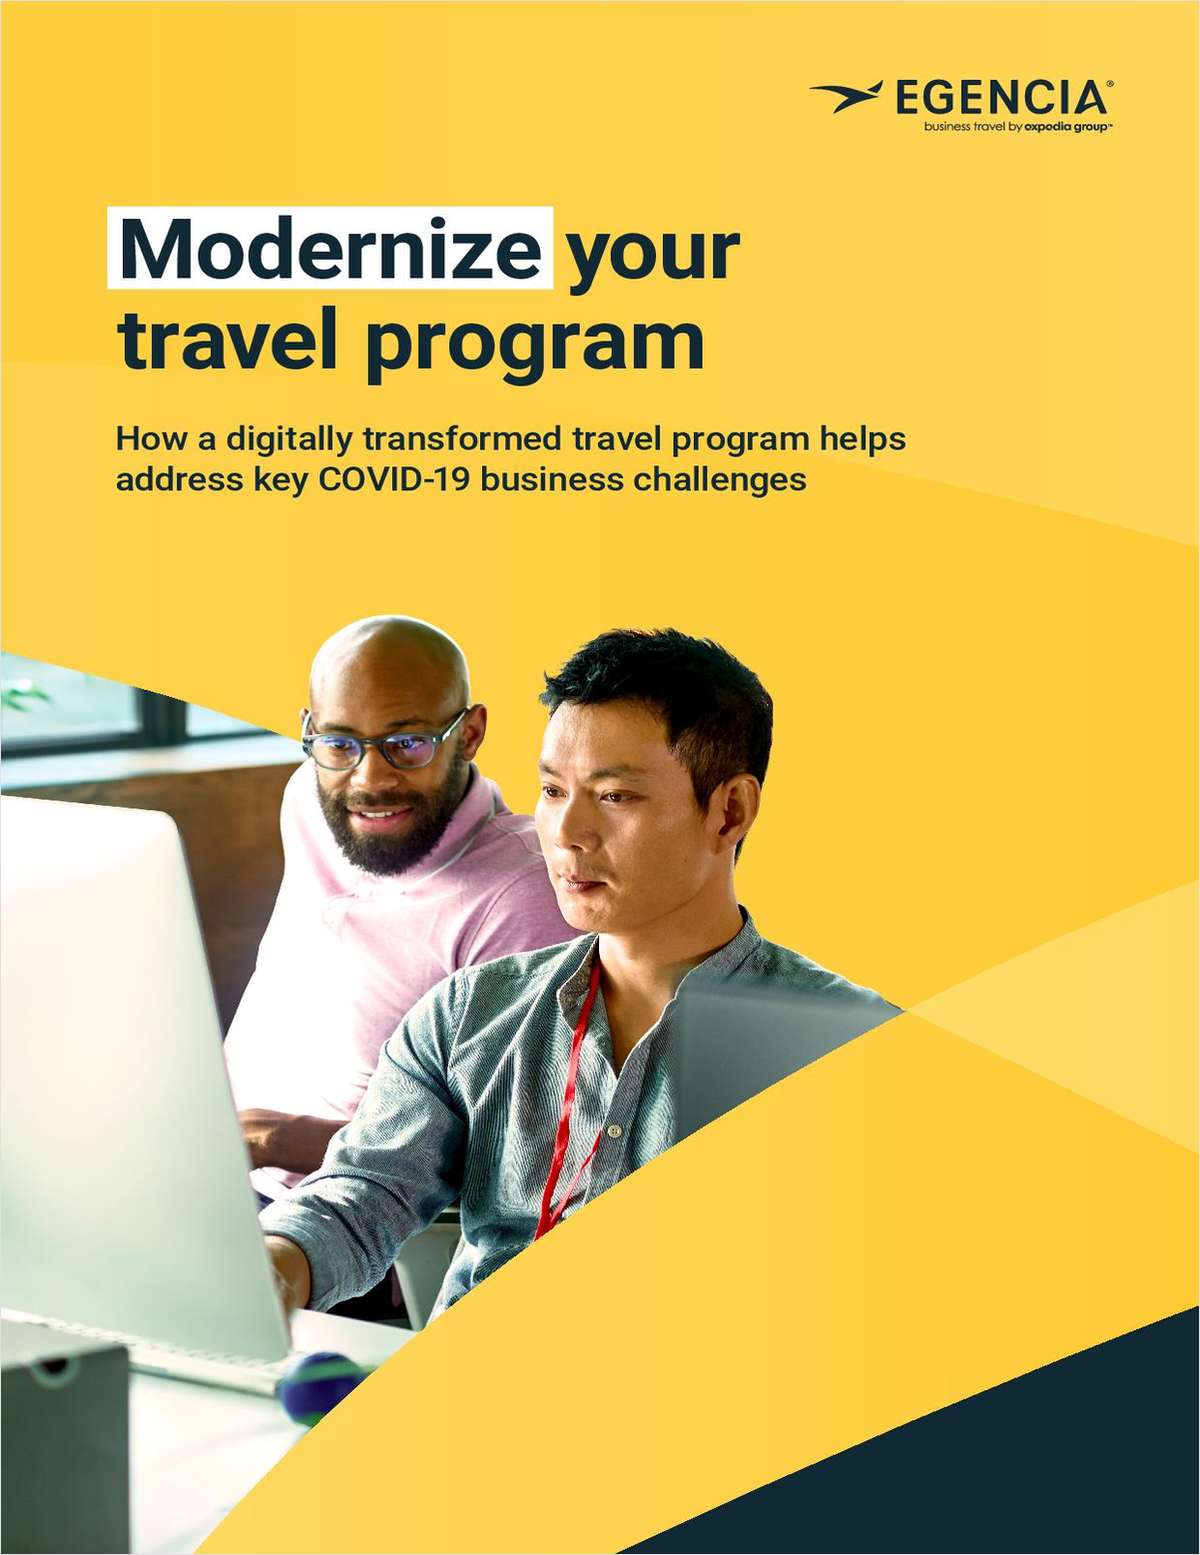 Learn How You Can Modernize Your Travel Program